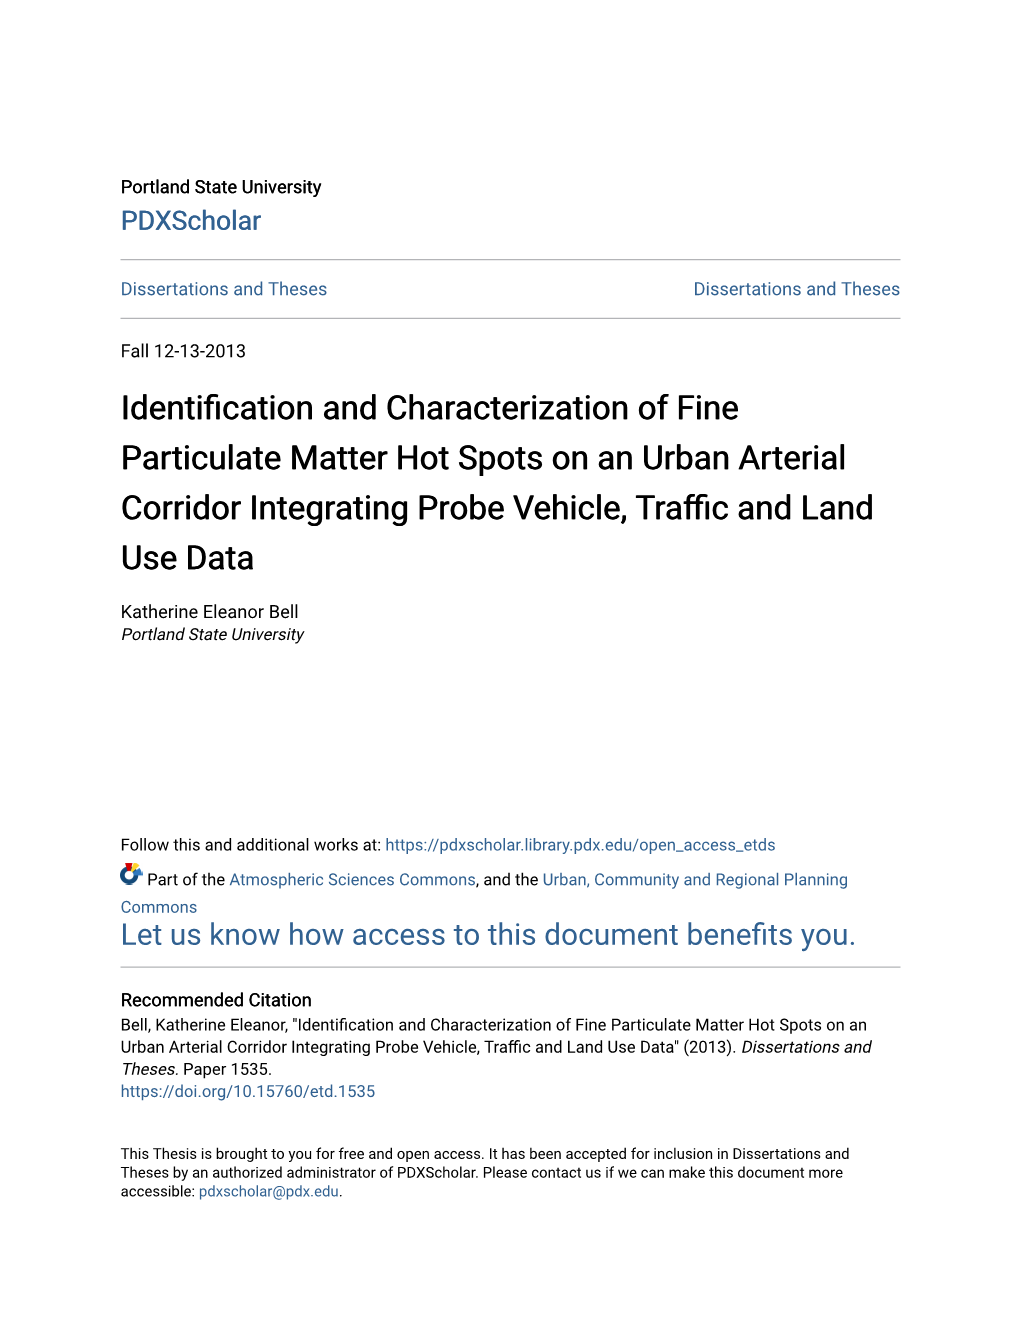 Identification and Characterization of Fine Particulate Matter Hot Spots on an Urban Arterial Corridor Integrating Probe Vehicle, Traffic and Land Use Data